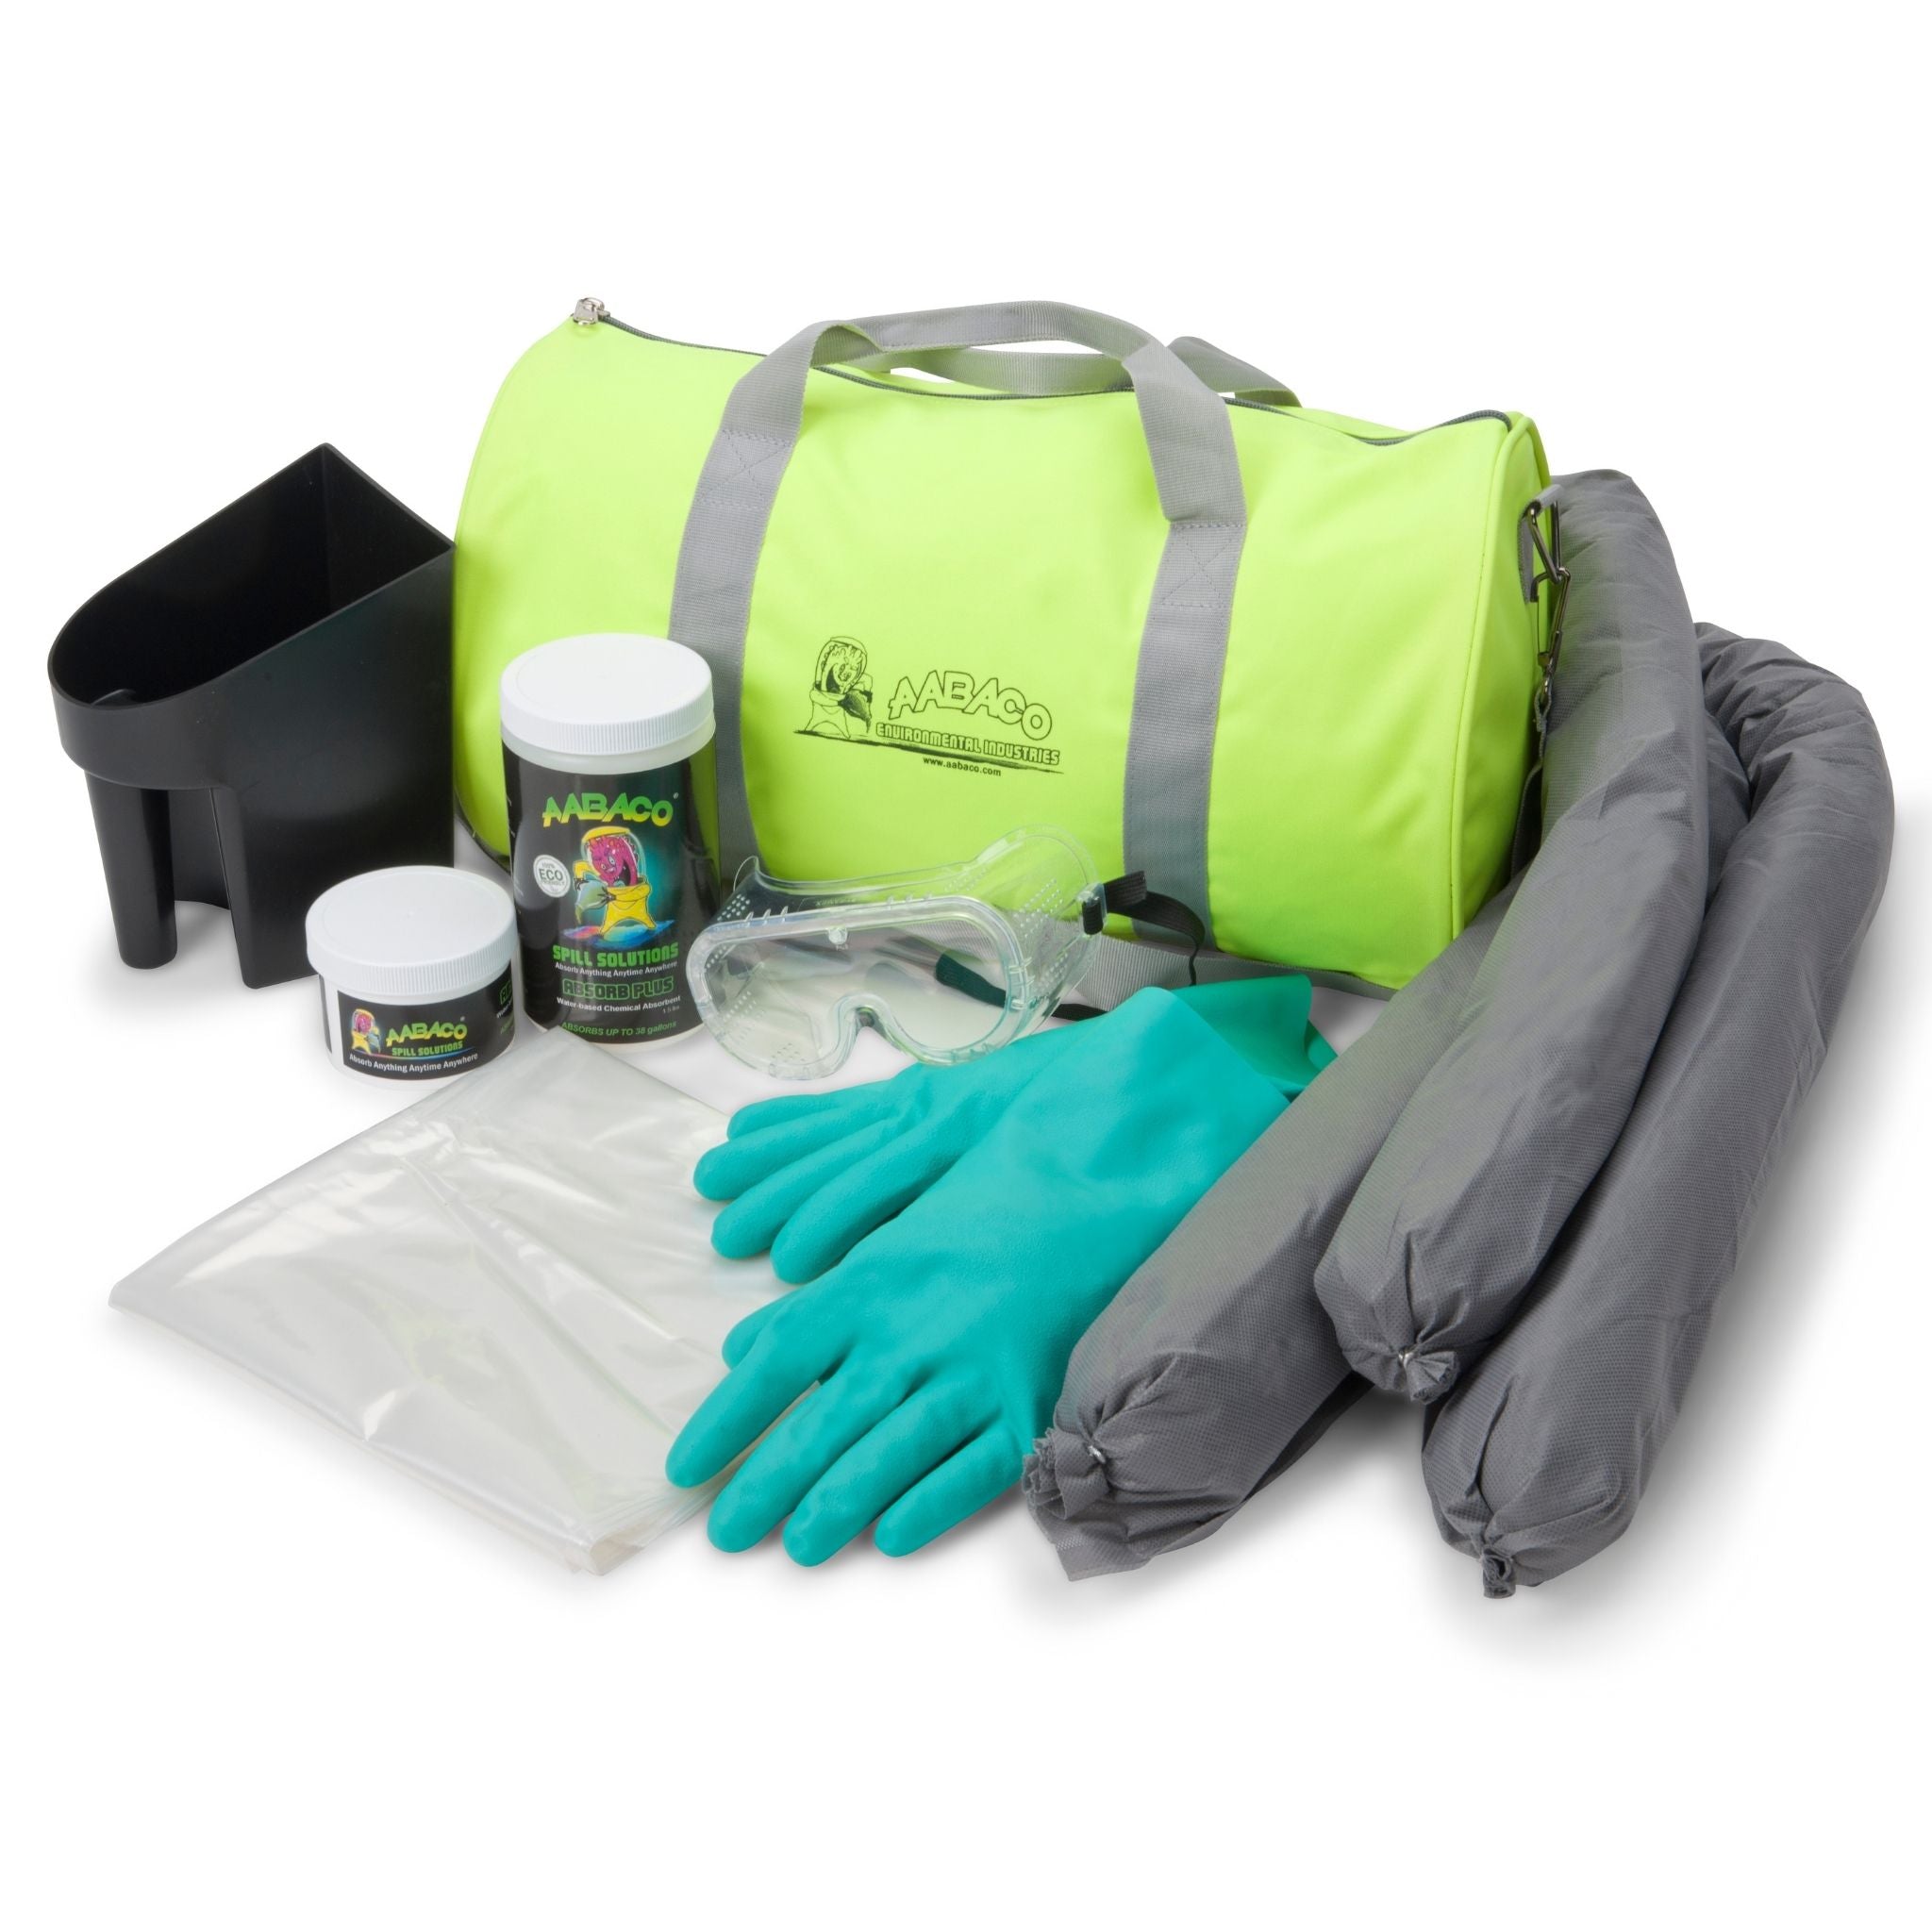 AABACO CHEMICAL ONLY SPILL KIT IN HIGH VIZ DUFFEL BAG – 50 GALLONS